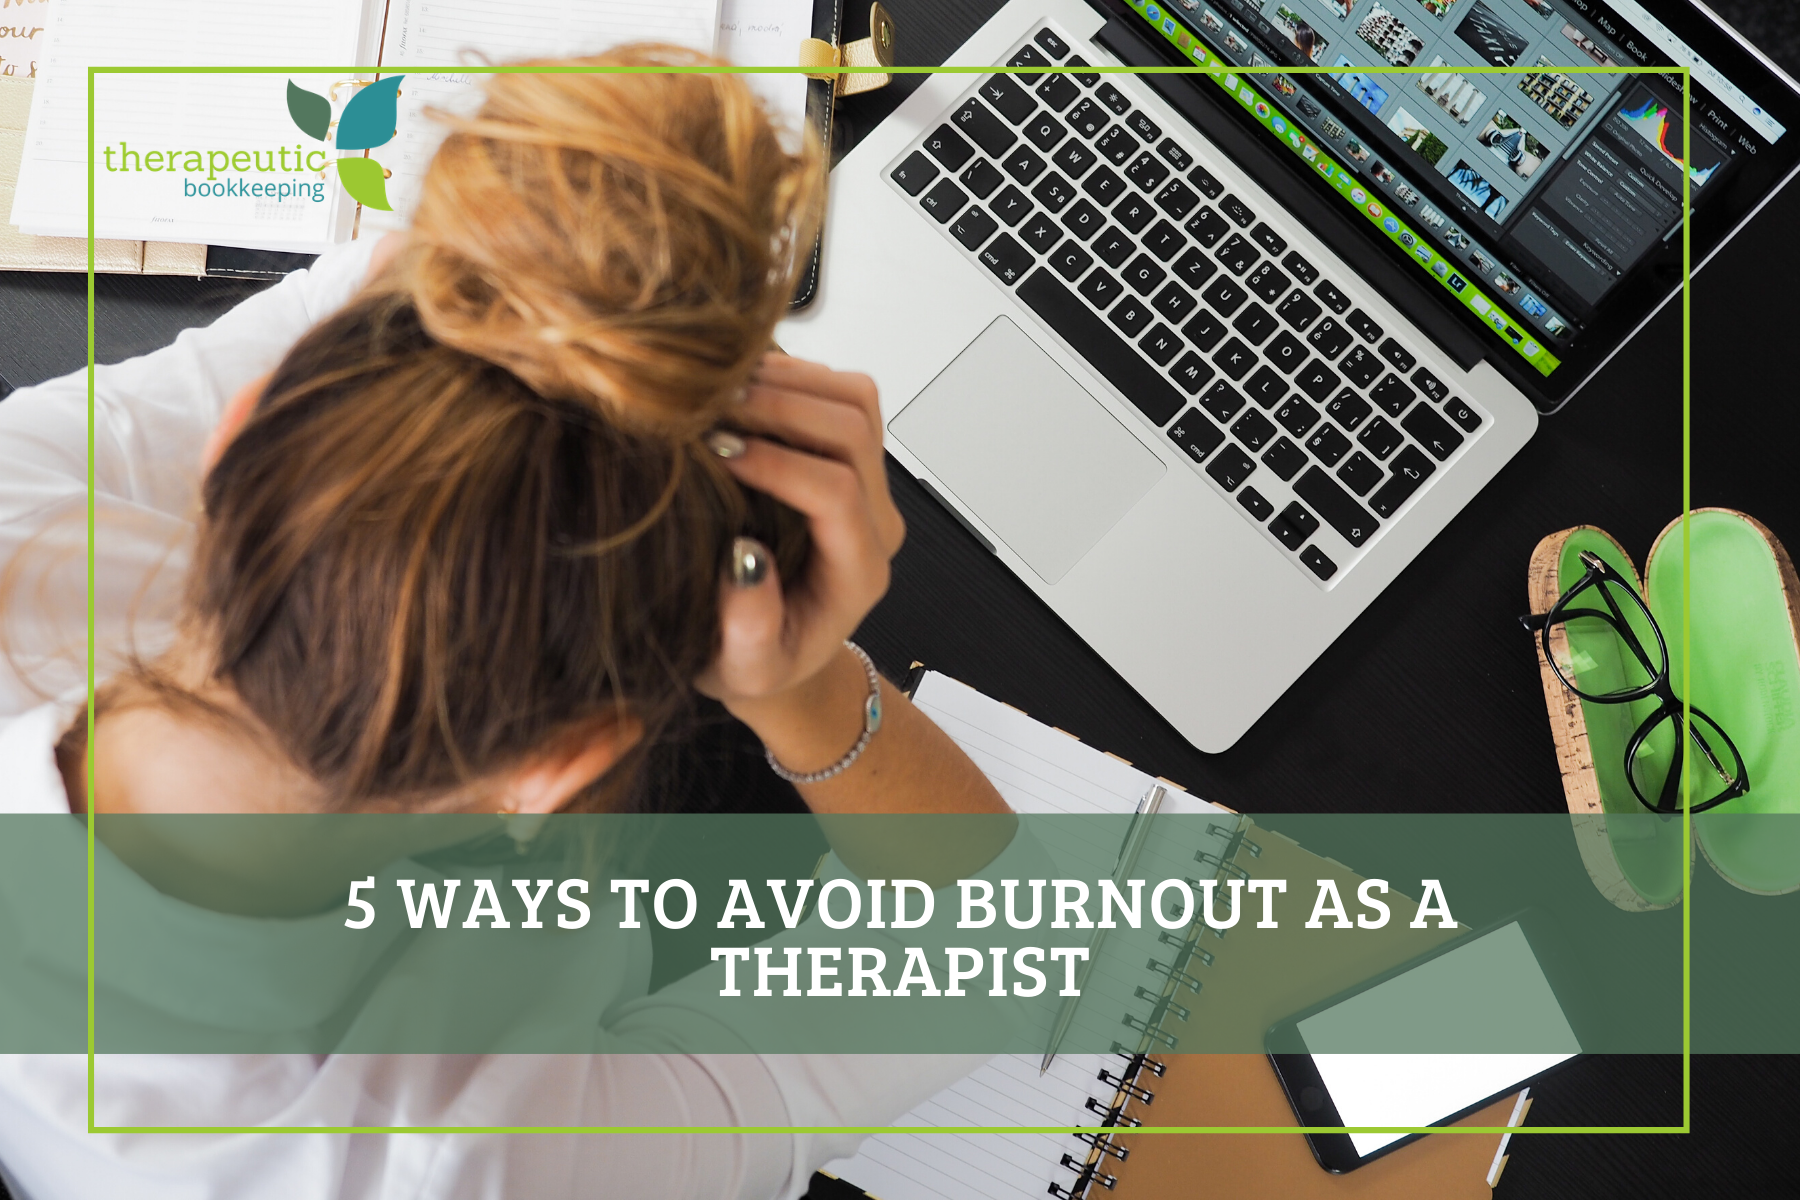 5 Ways to Avoid Burnout as a Therapist